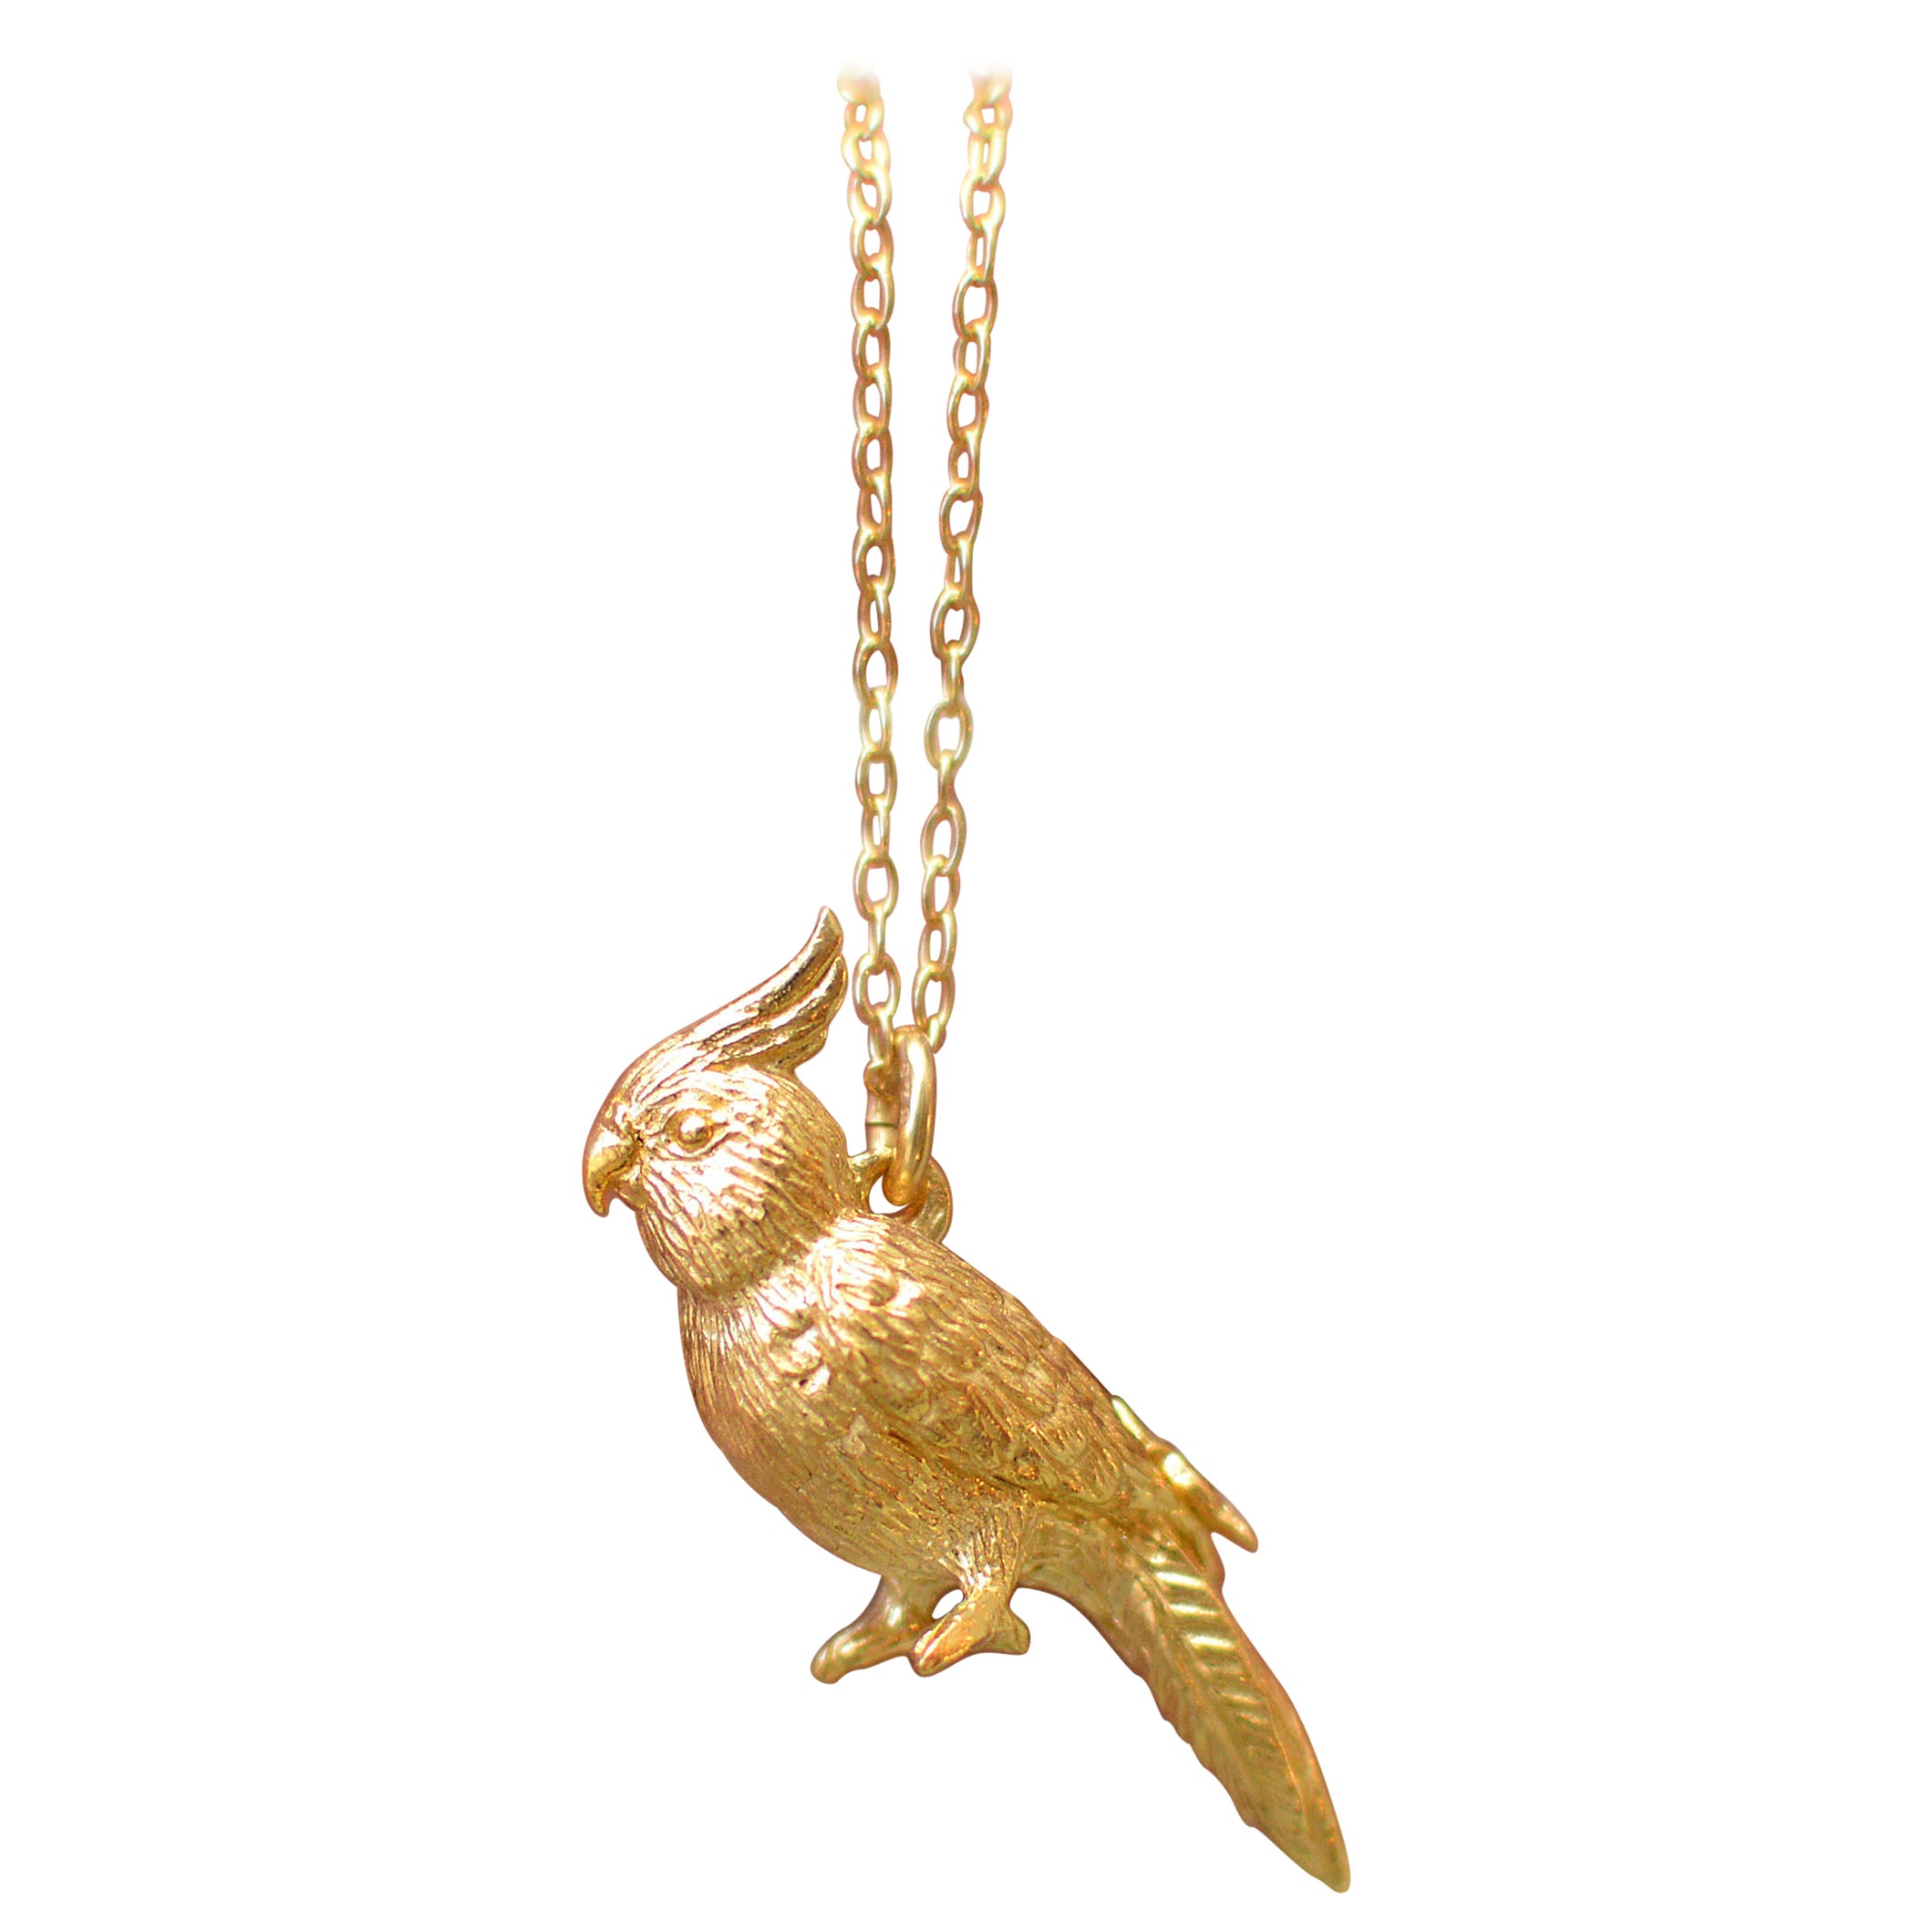 Solid 18 Carat Gold Cockatiel Pendant by Lucy Stopes-Roe